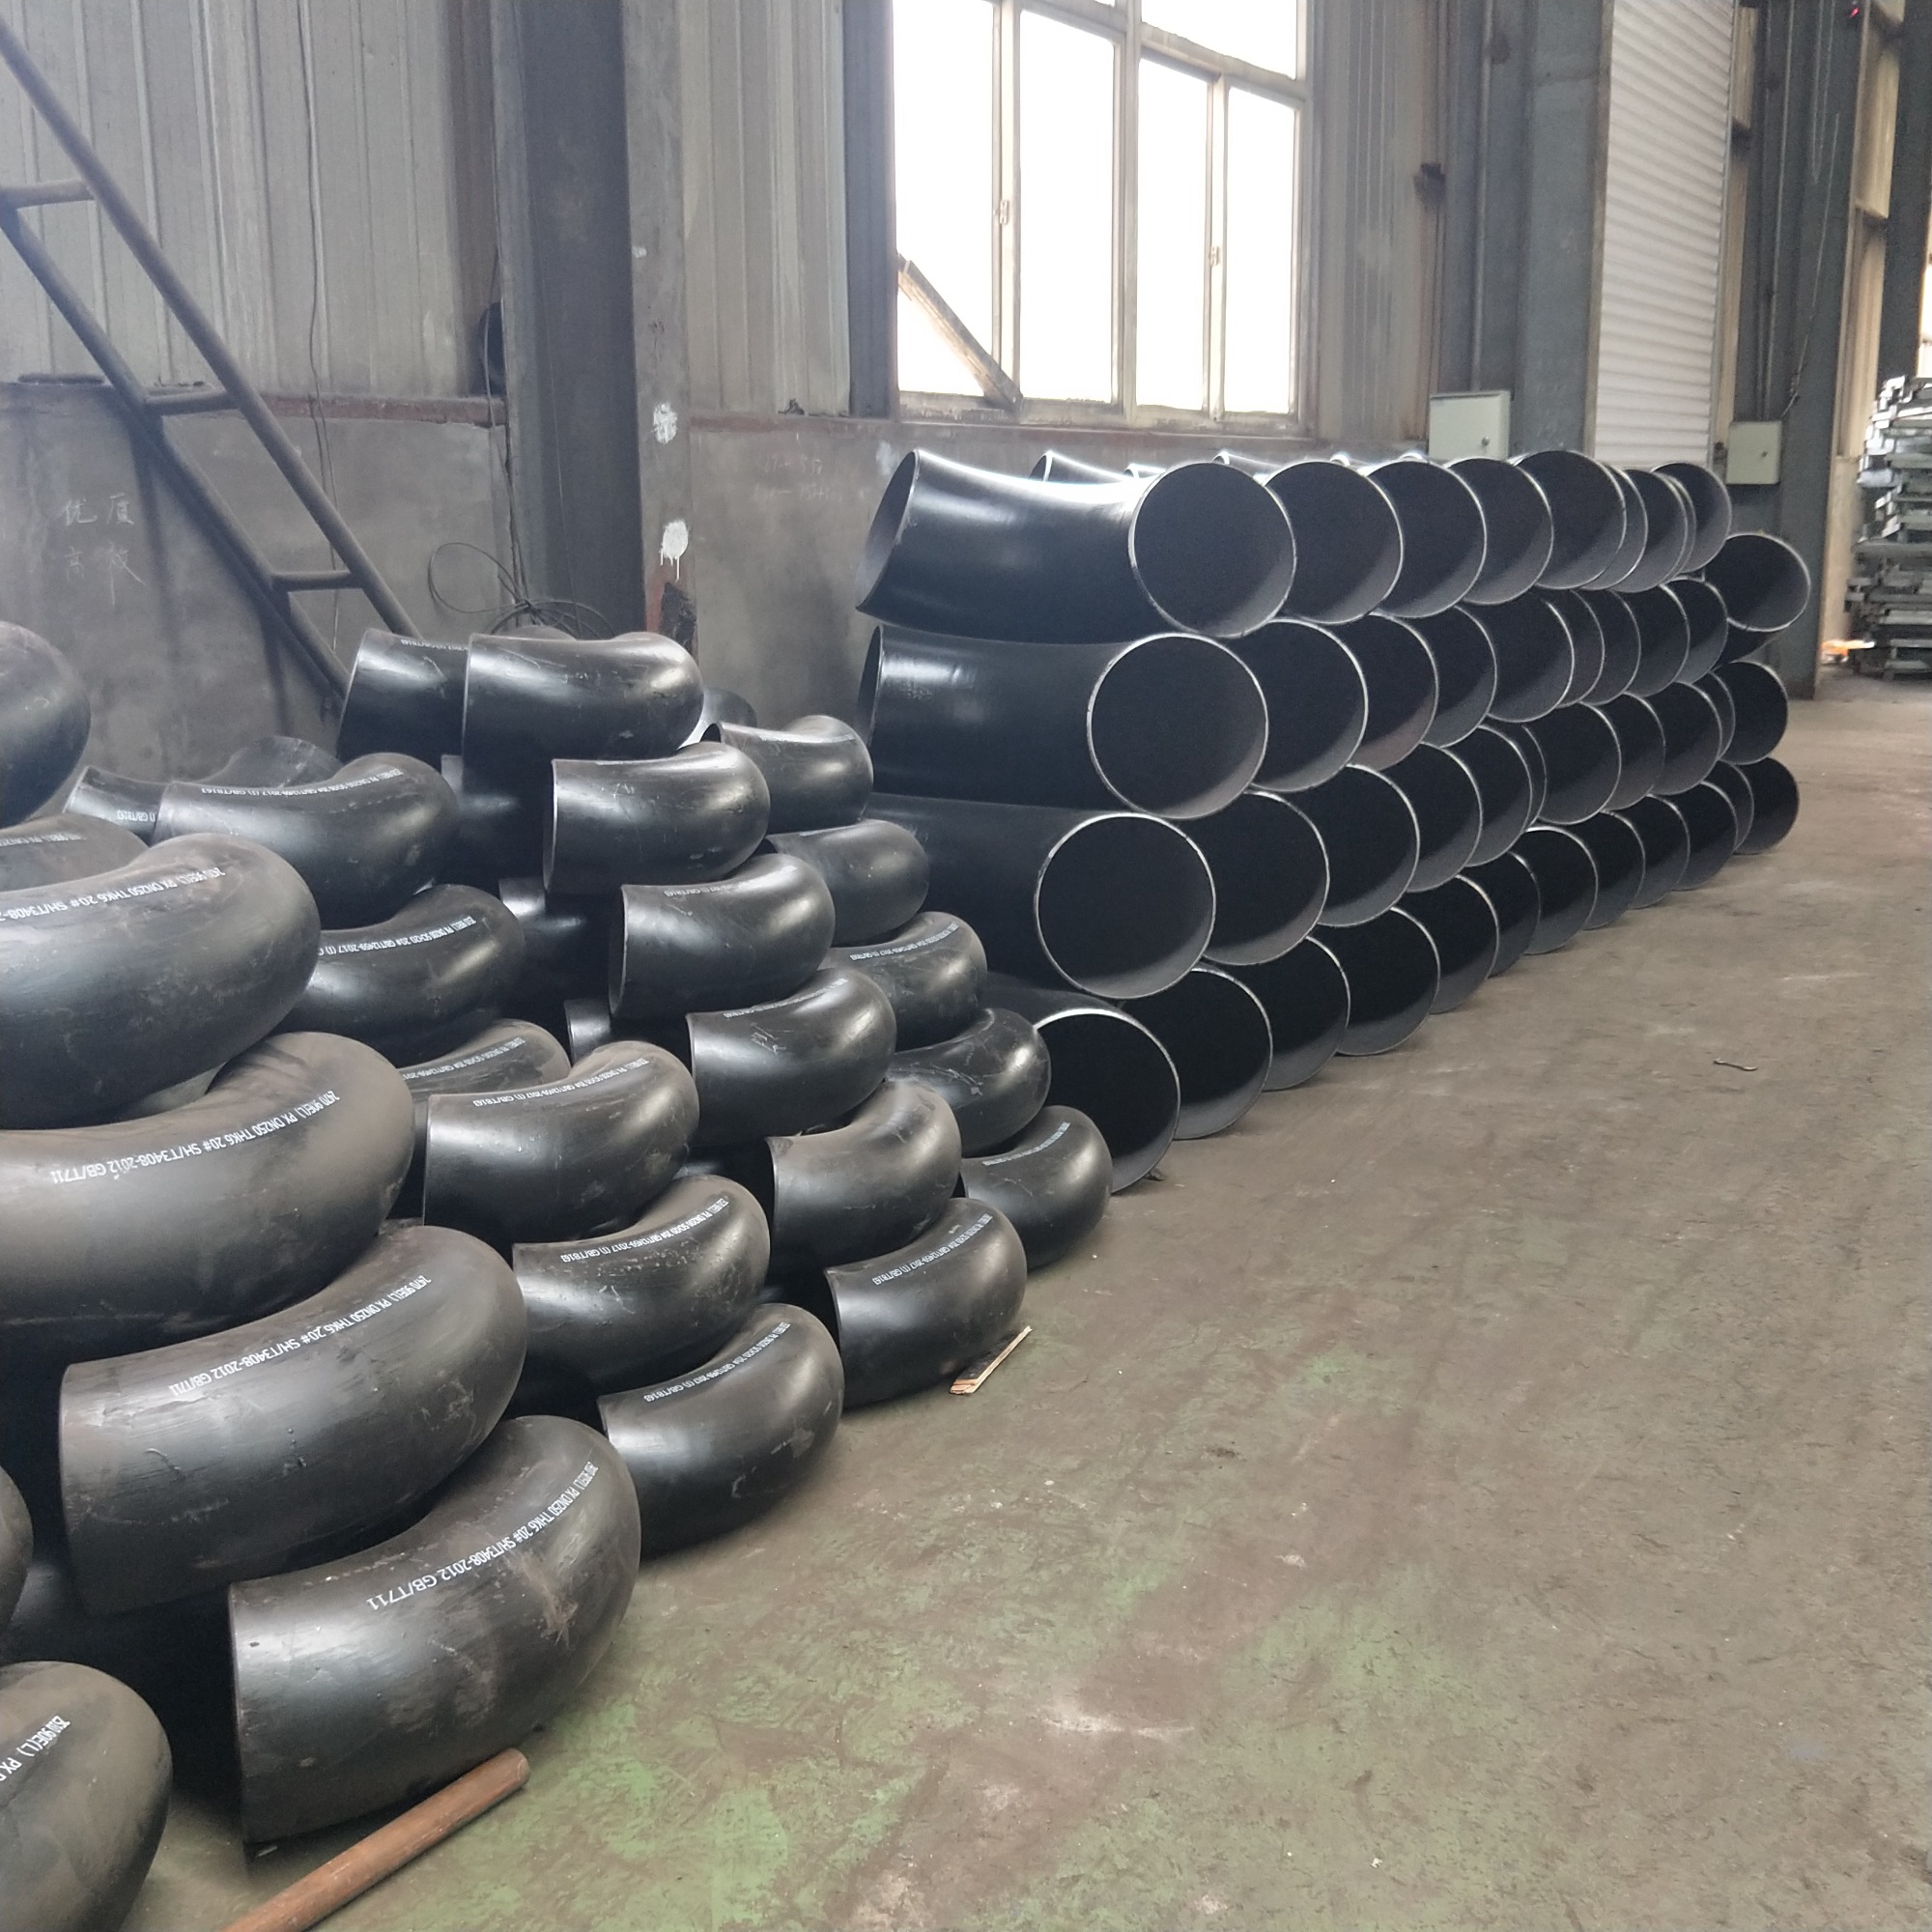 What are the principles in the production process of carbon steel elbow